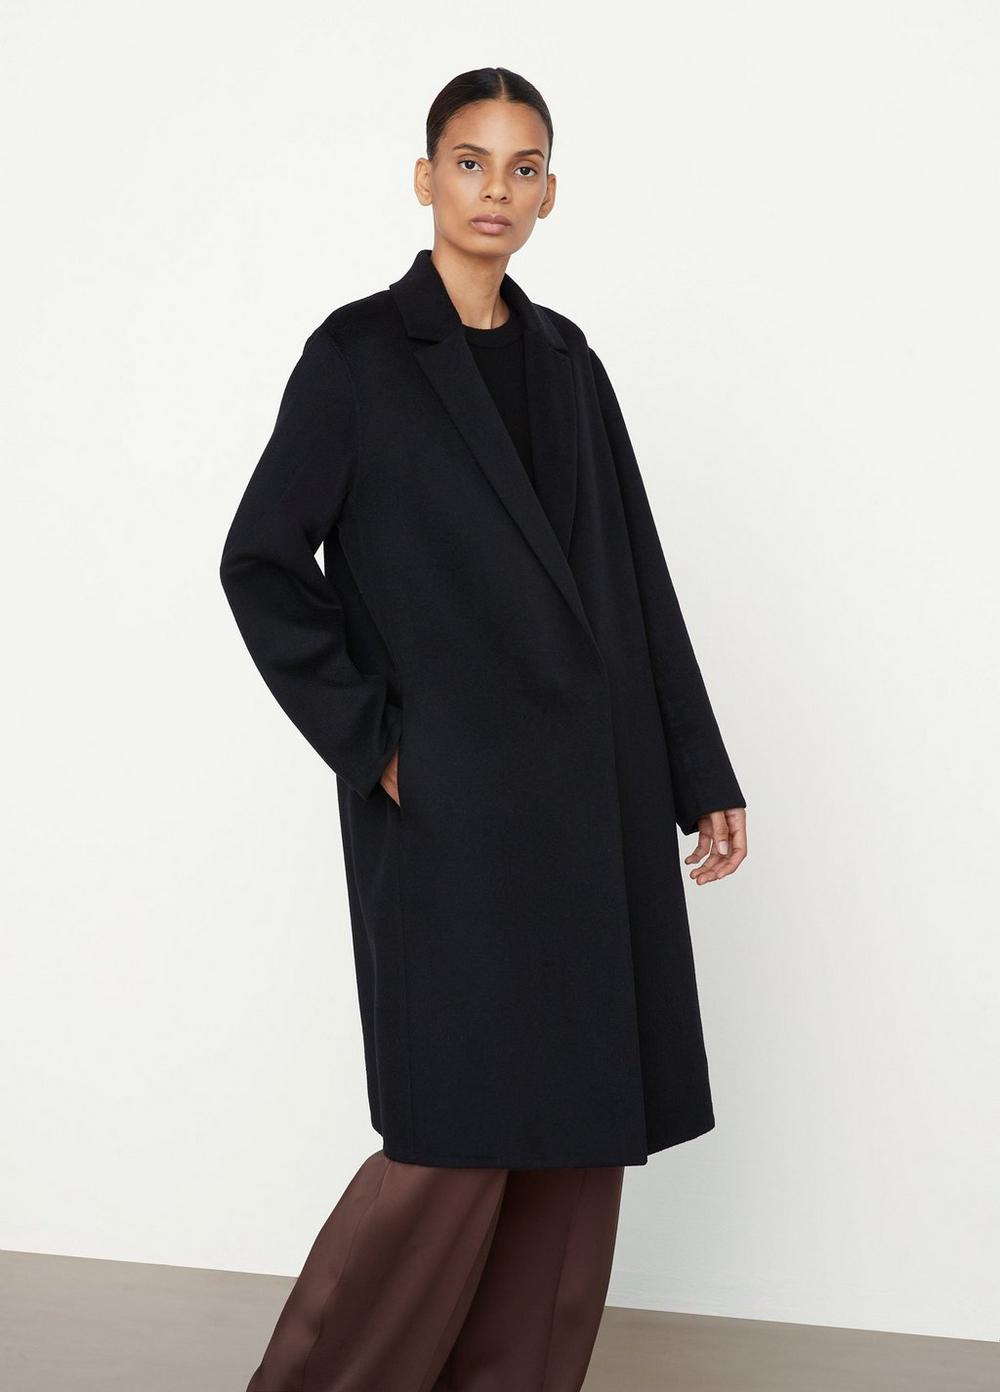 Vince | Classic Straight Coat in Black | Vince Unfold